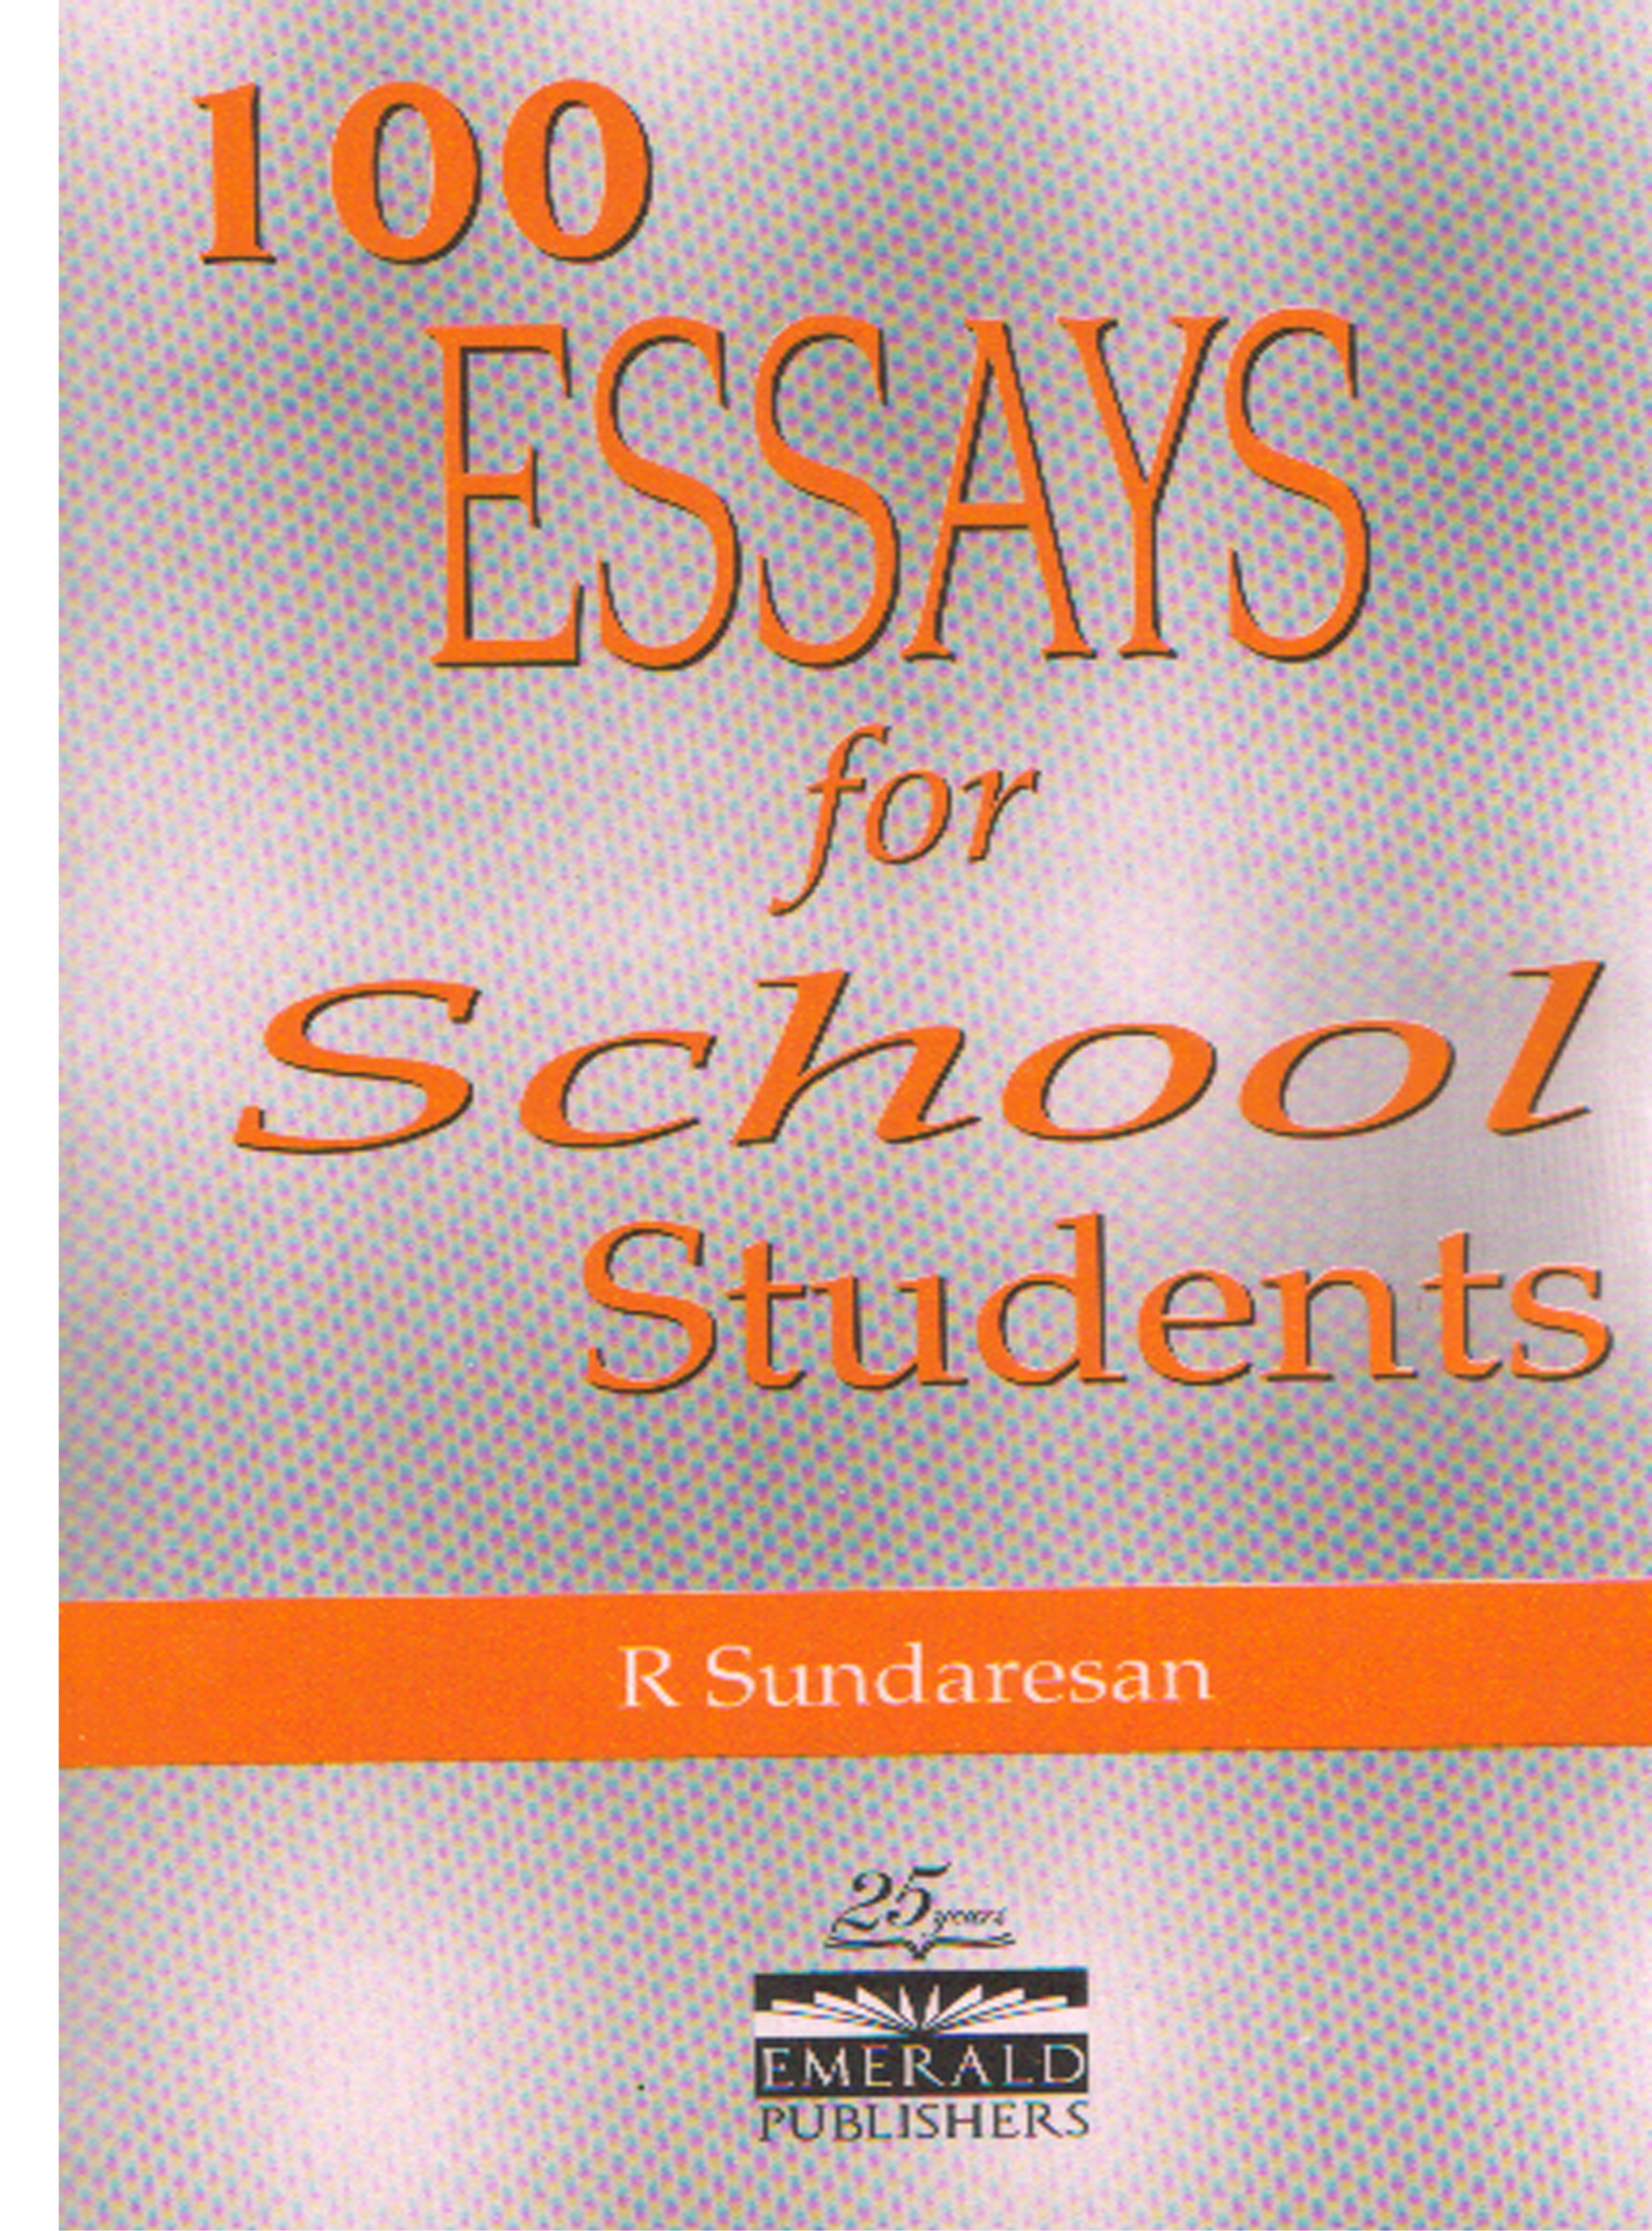 100-essays-for-school-students